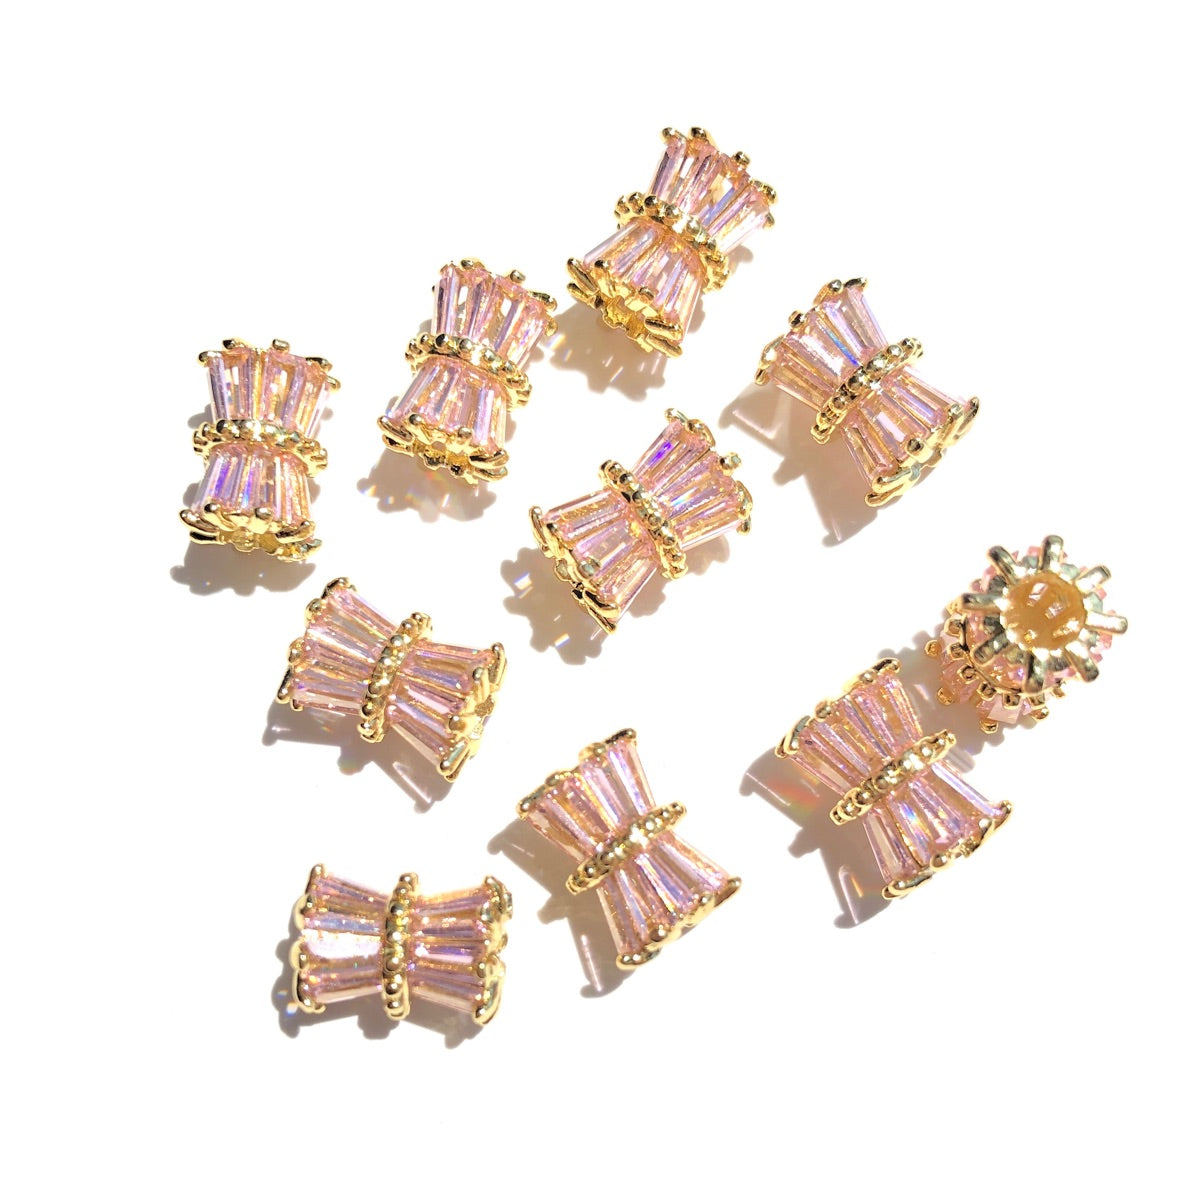 10-20-50pcs/lot Pink CZ Paved Hourglass Spacers Gold CZ Paved Spacers Hourglass Beads New Spacers Arrivals Wholesale Charms Beads Beyond